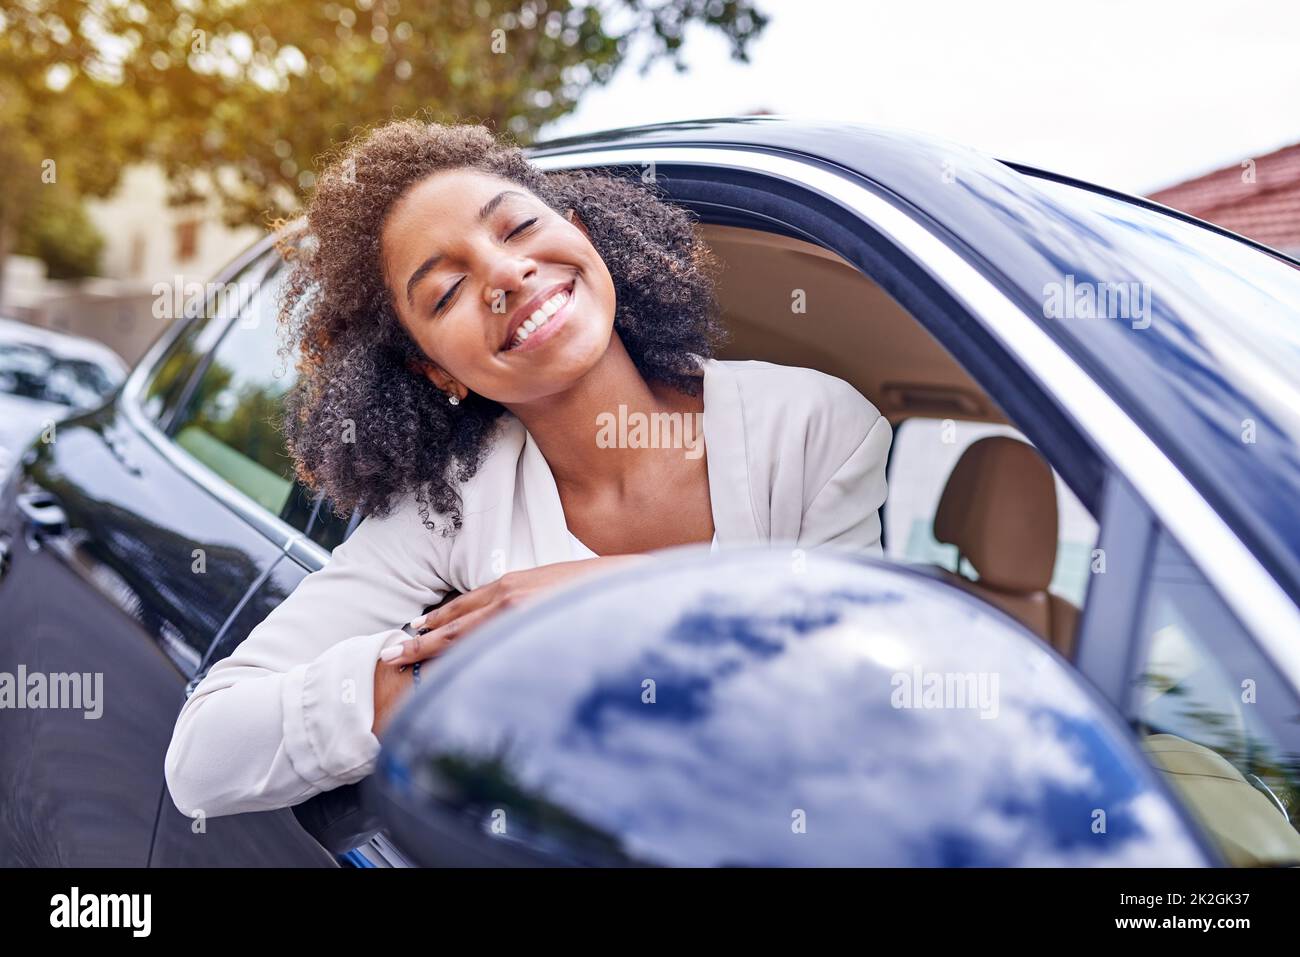 Feeling the wind in her hair. Shot of an attractive young businesswoman leaning out of her window while driving to work on her morning commute. Stock Photo